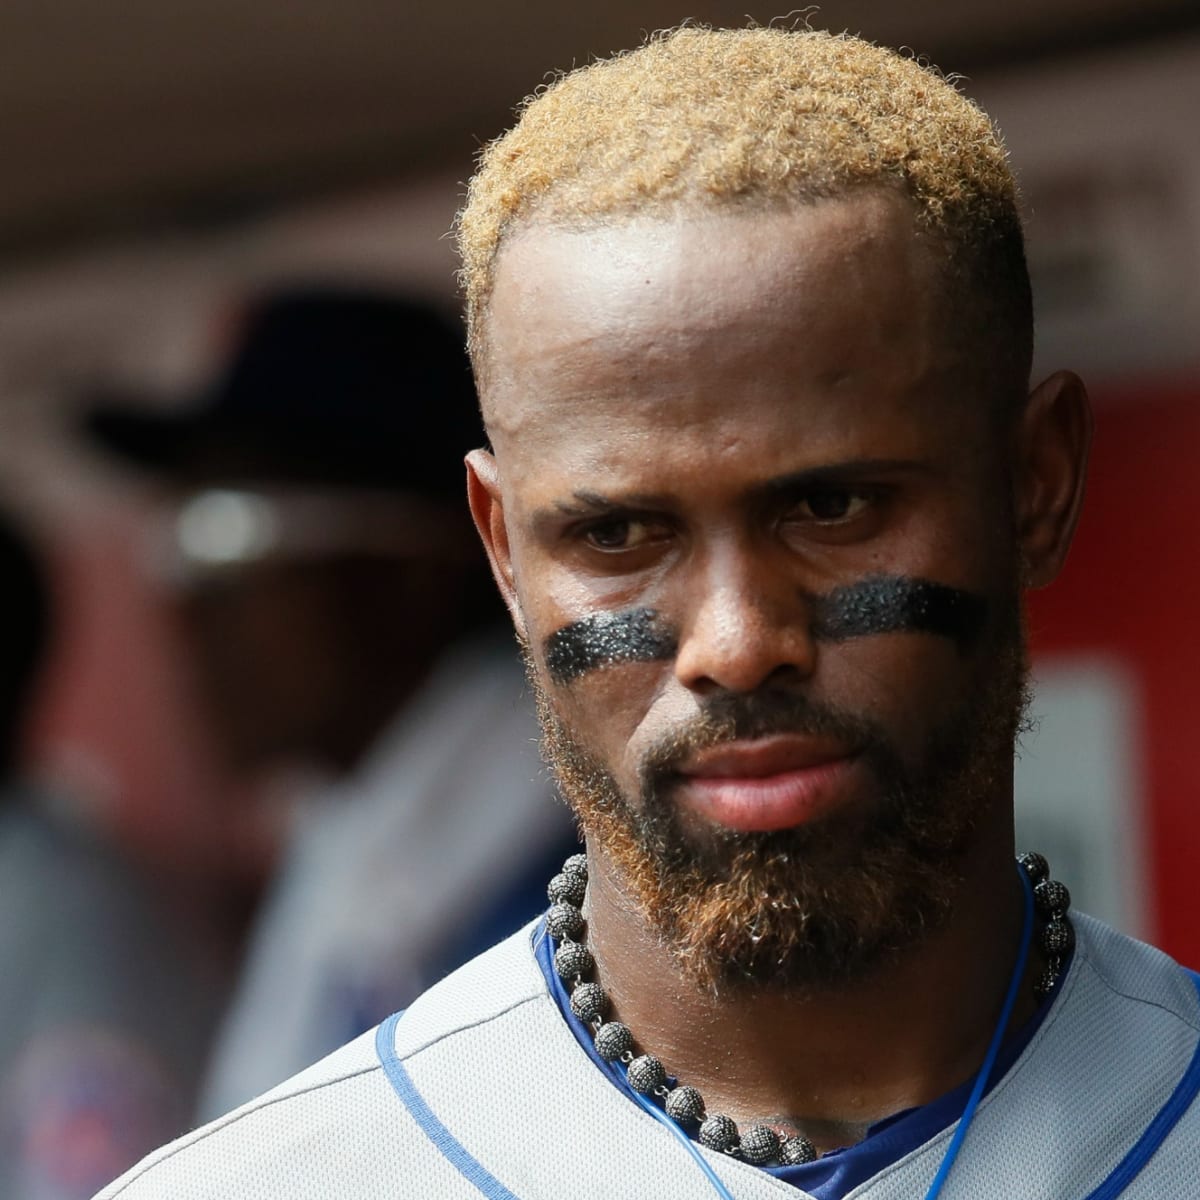 Mother of Jose Reyes' child says she was attacked by MLB star's wife